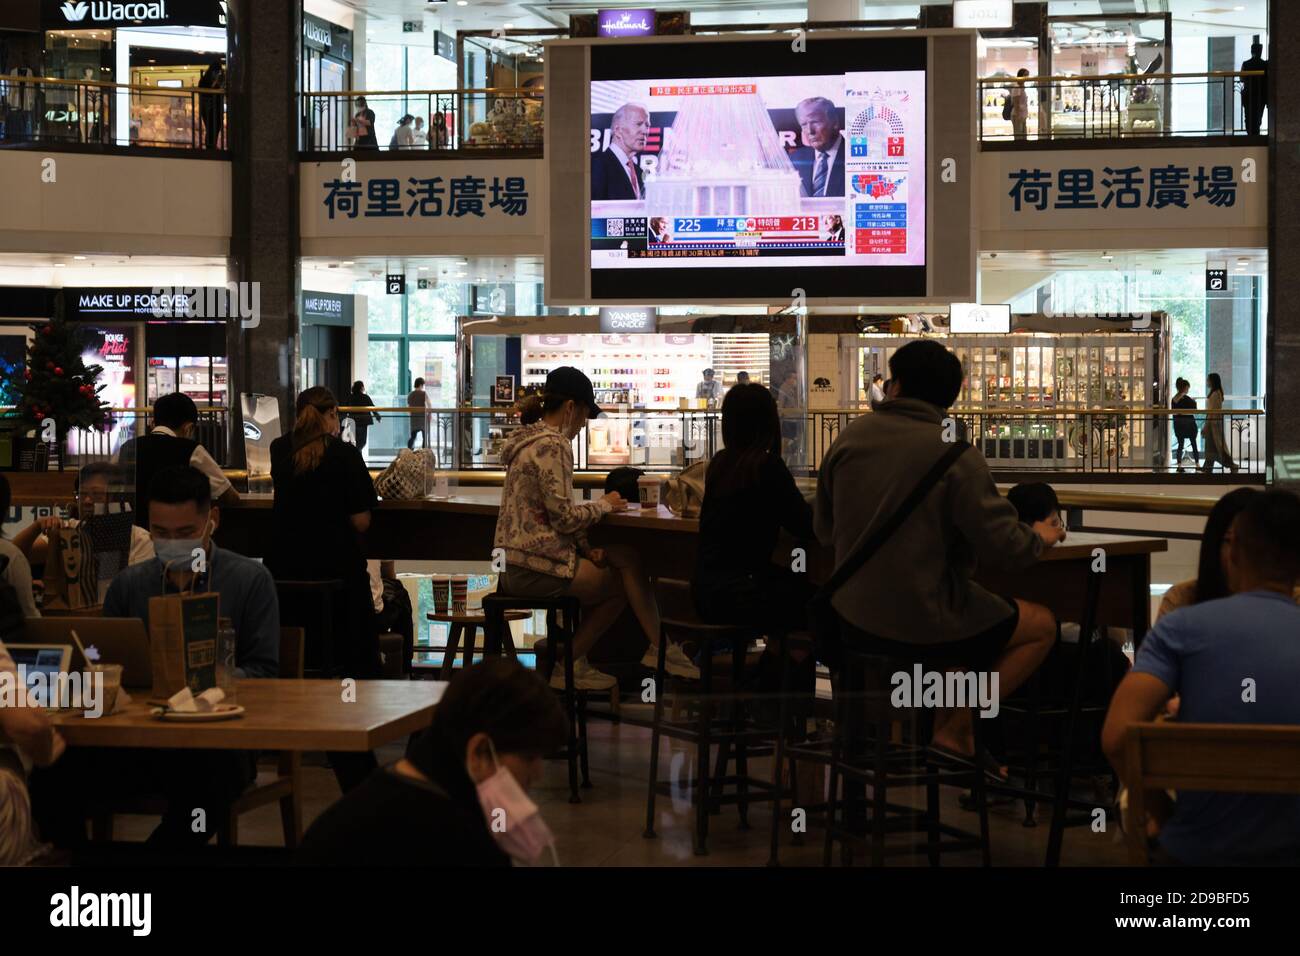 A screen broadcasts the live news report of the US Presidential elections at a shopping mall. Stock Photo